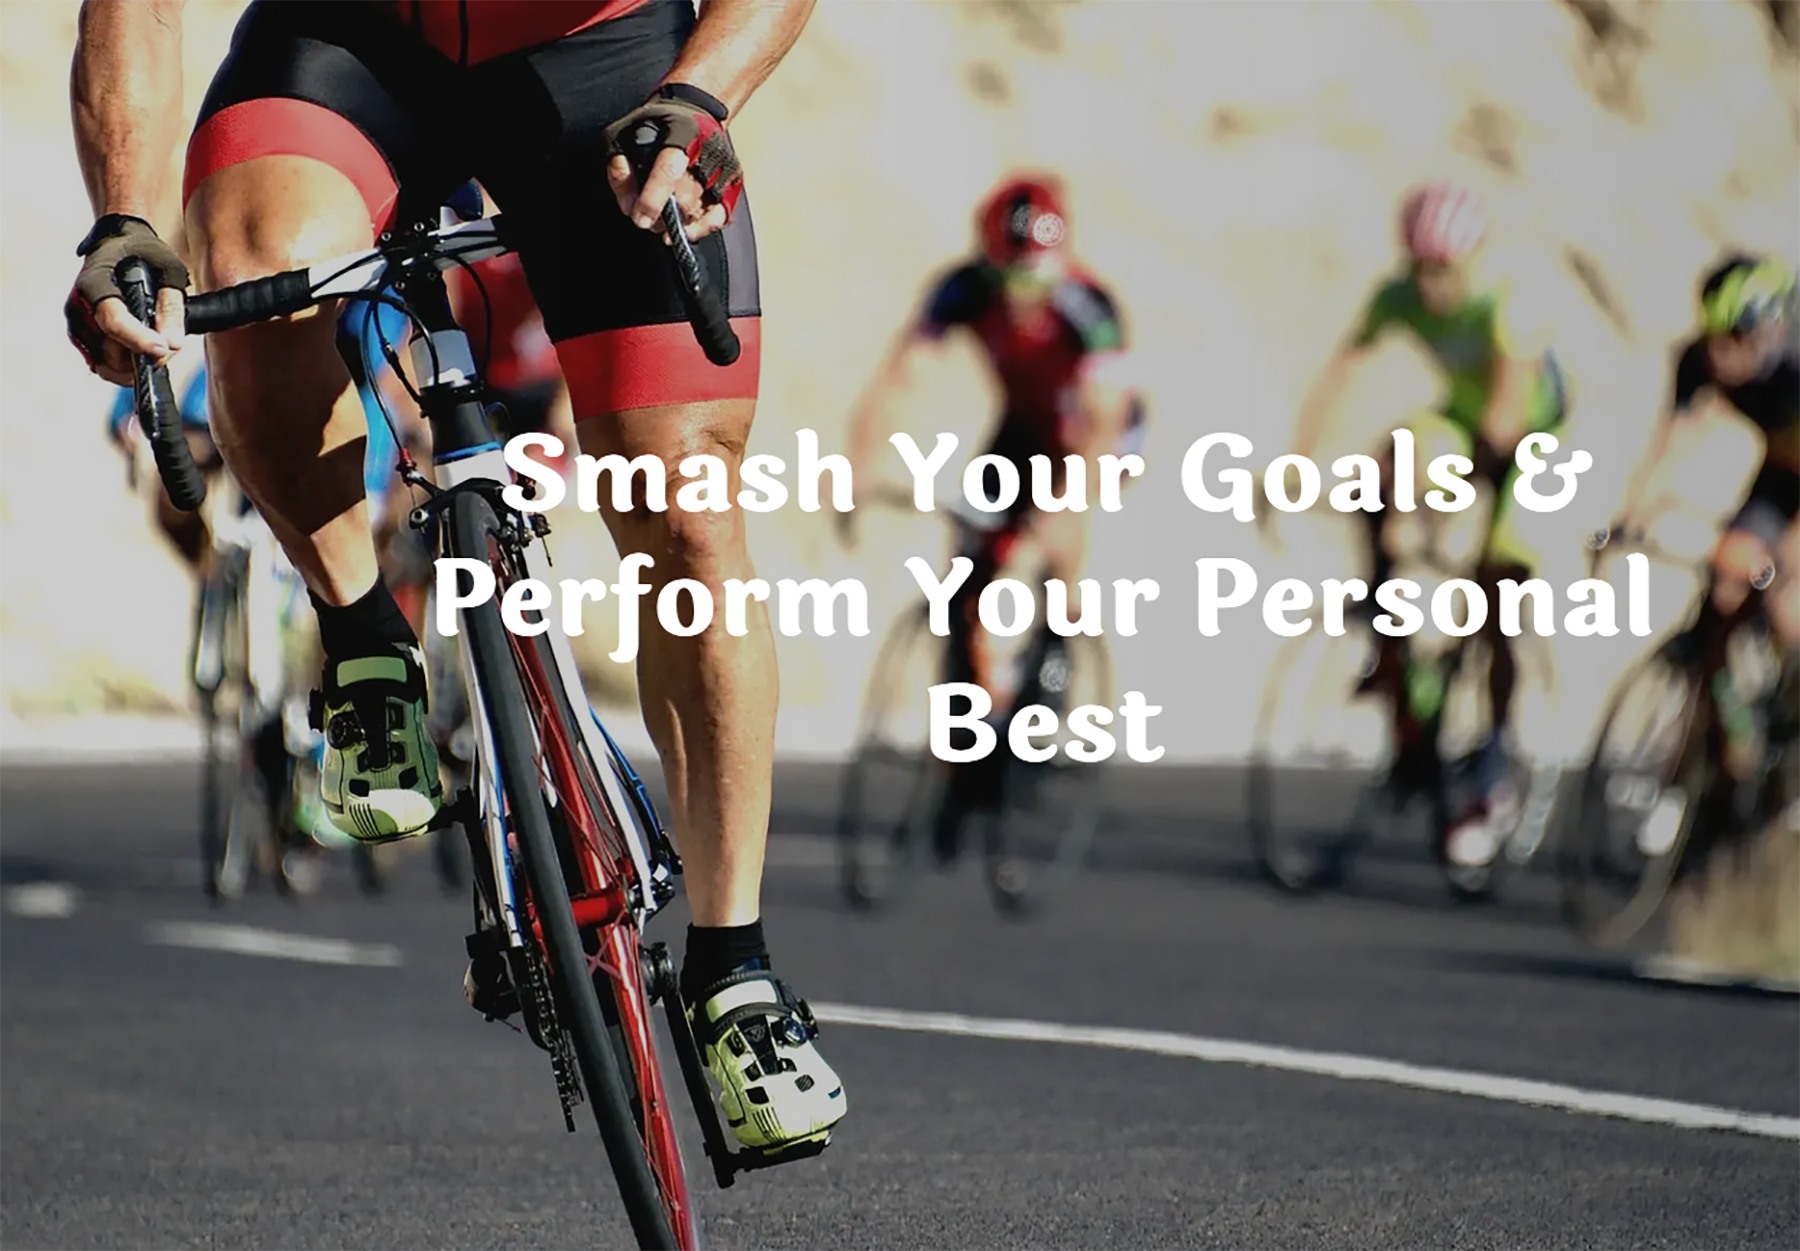 Endurance Athletes! Smash Your goals! Enhance Your Performance with Stanton Orchards Tart Cherry Concentrate.